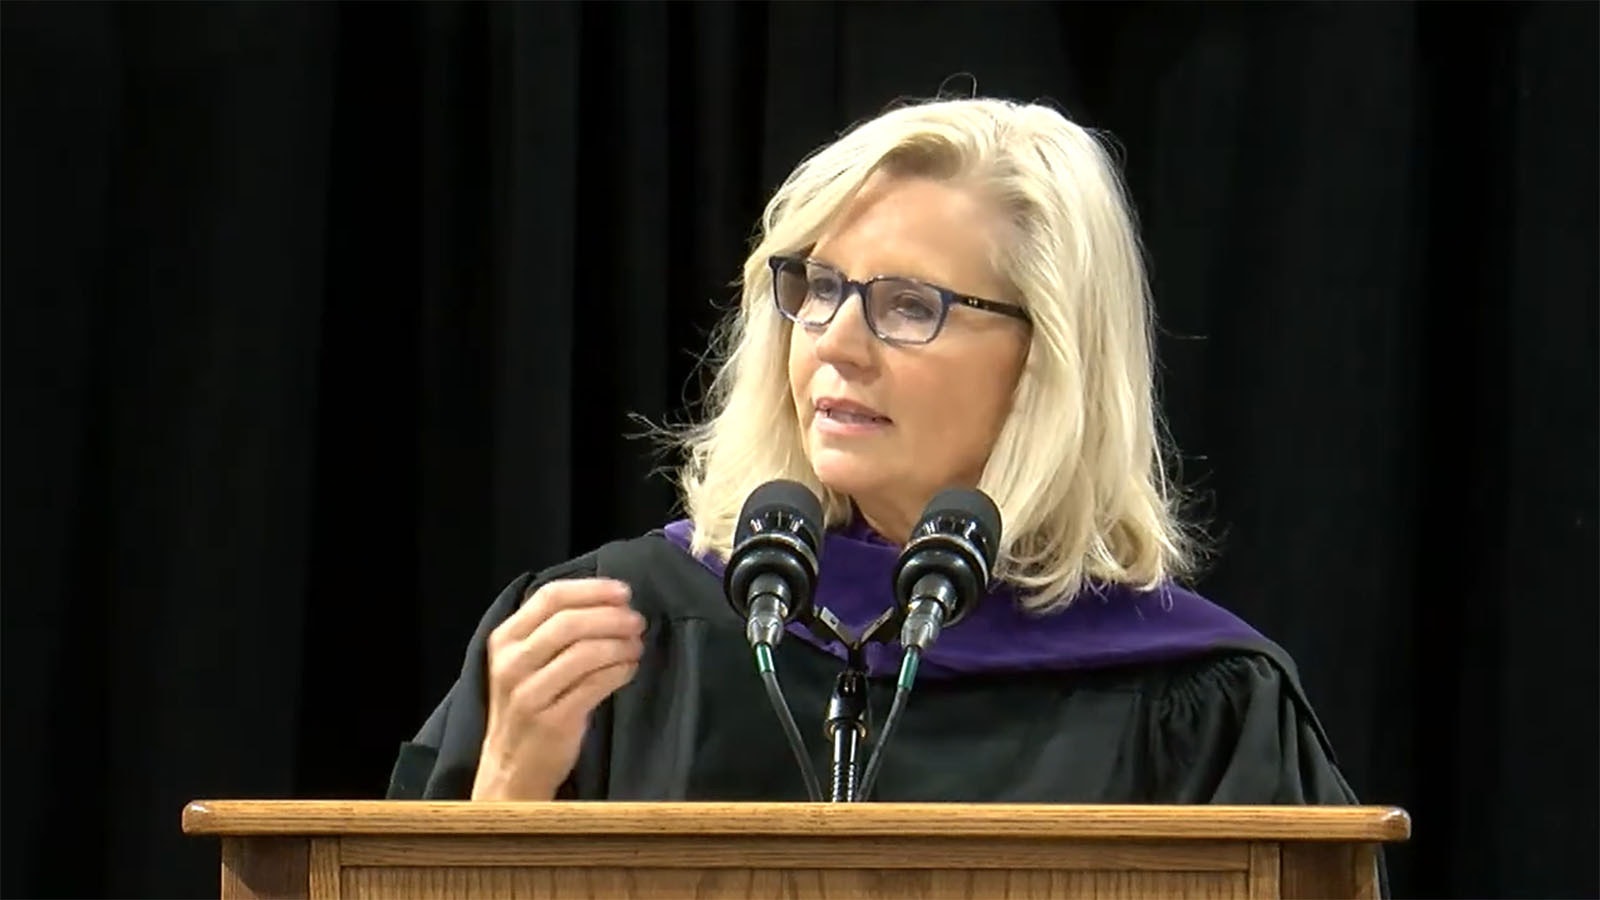 Liz Cheney gives the 2023 commencement speech at Colorado College in Colorado Springs on Sunday.